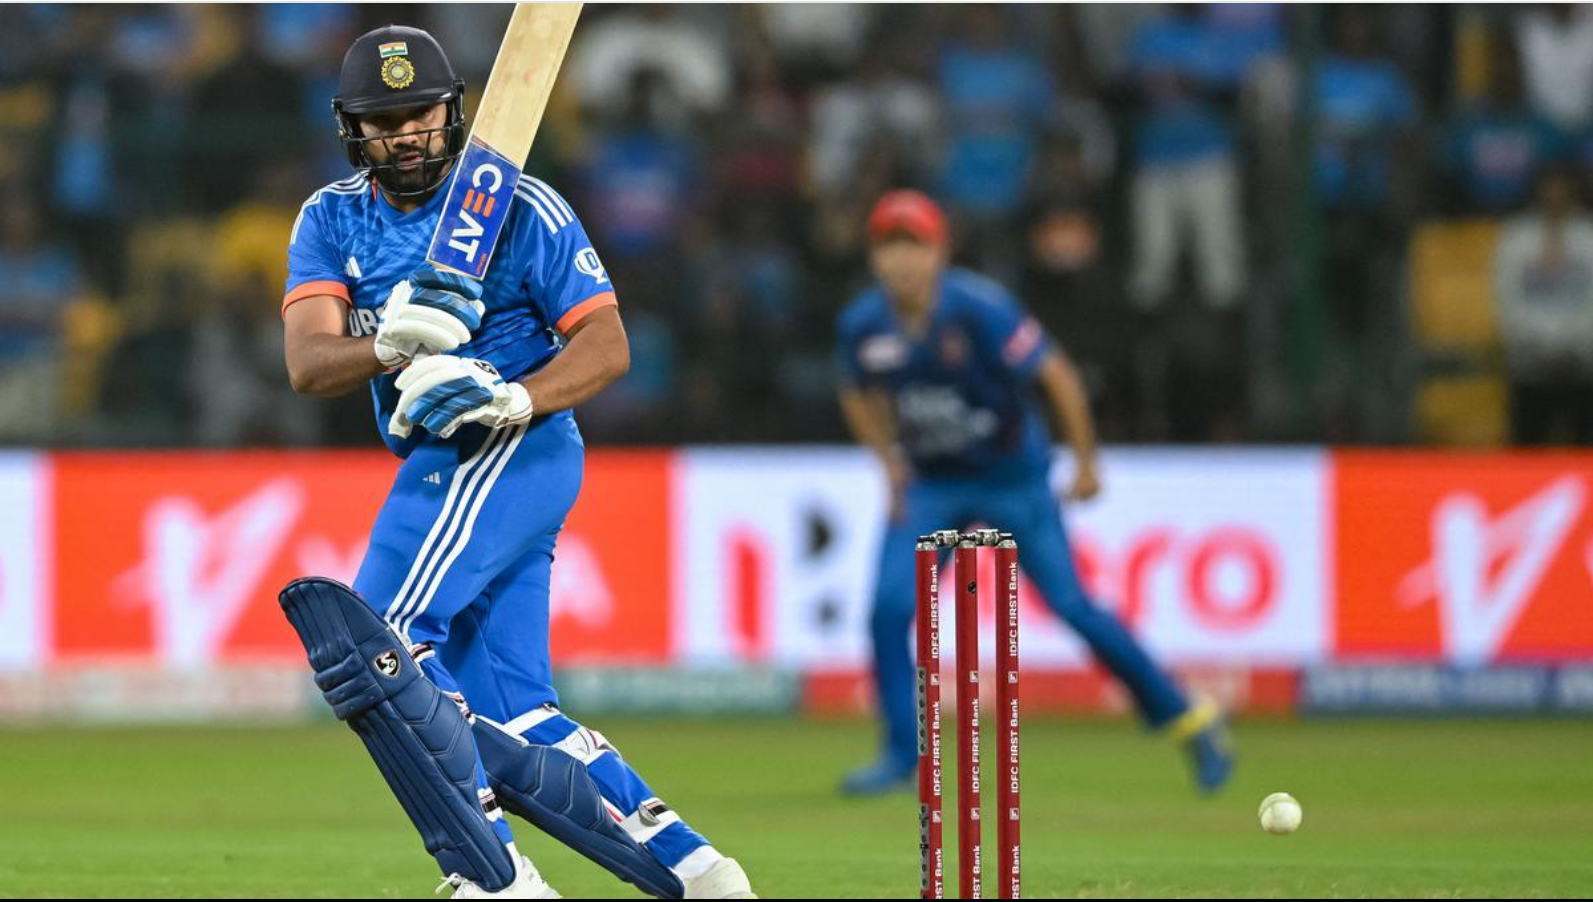 ‘Retired Out Or Retired Hurt?’ – Decision To Allow Rohit Sharma Bat In Second Super Over Sparks Controversy: Here’s What The Rule Says